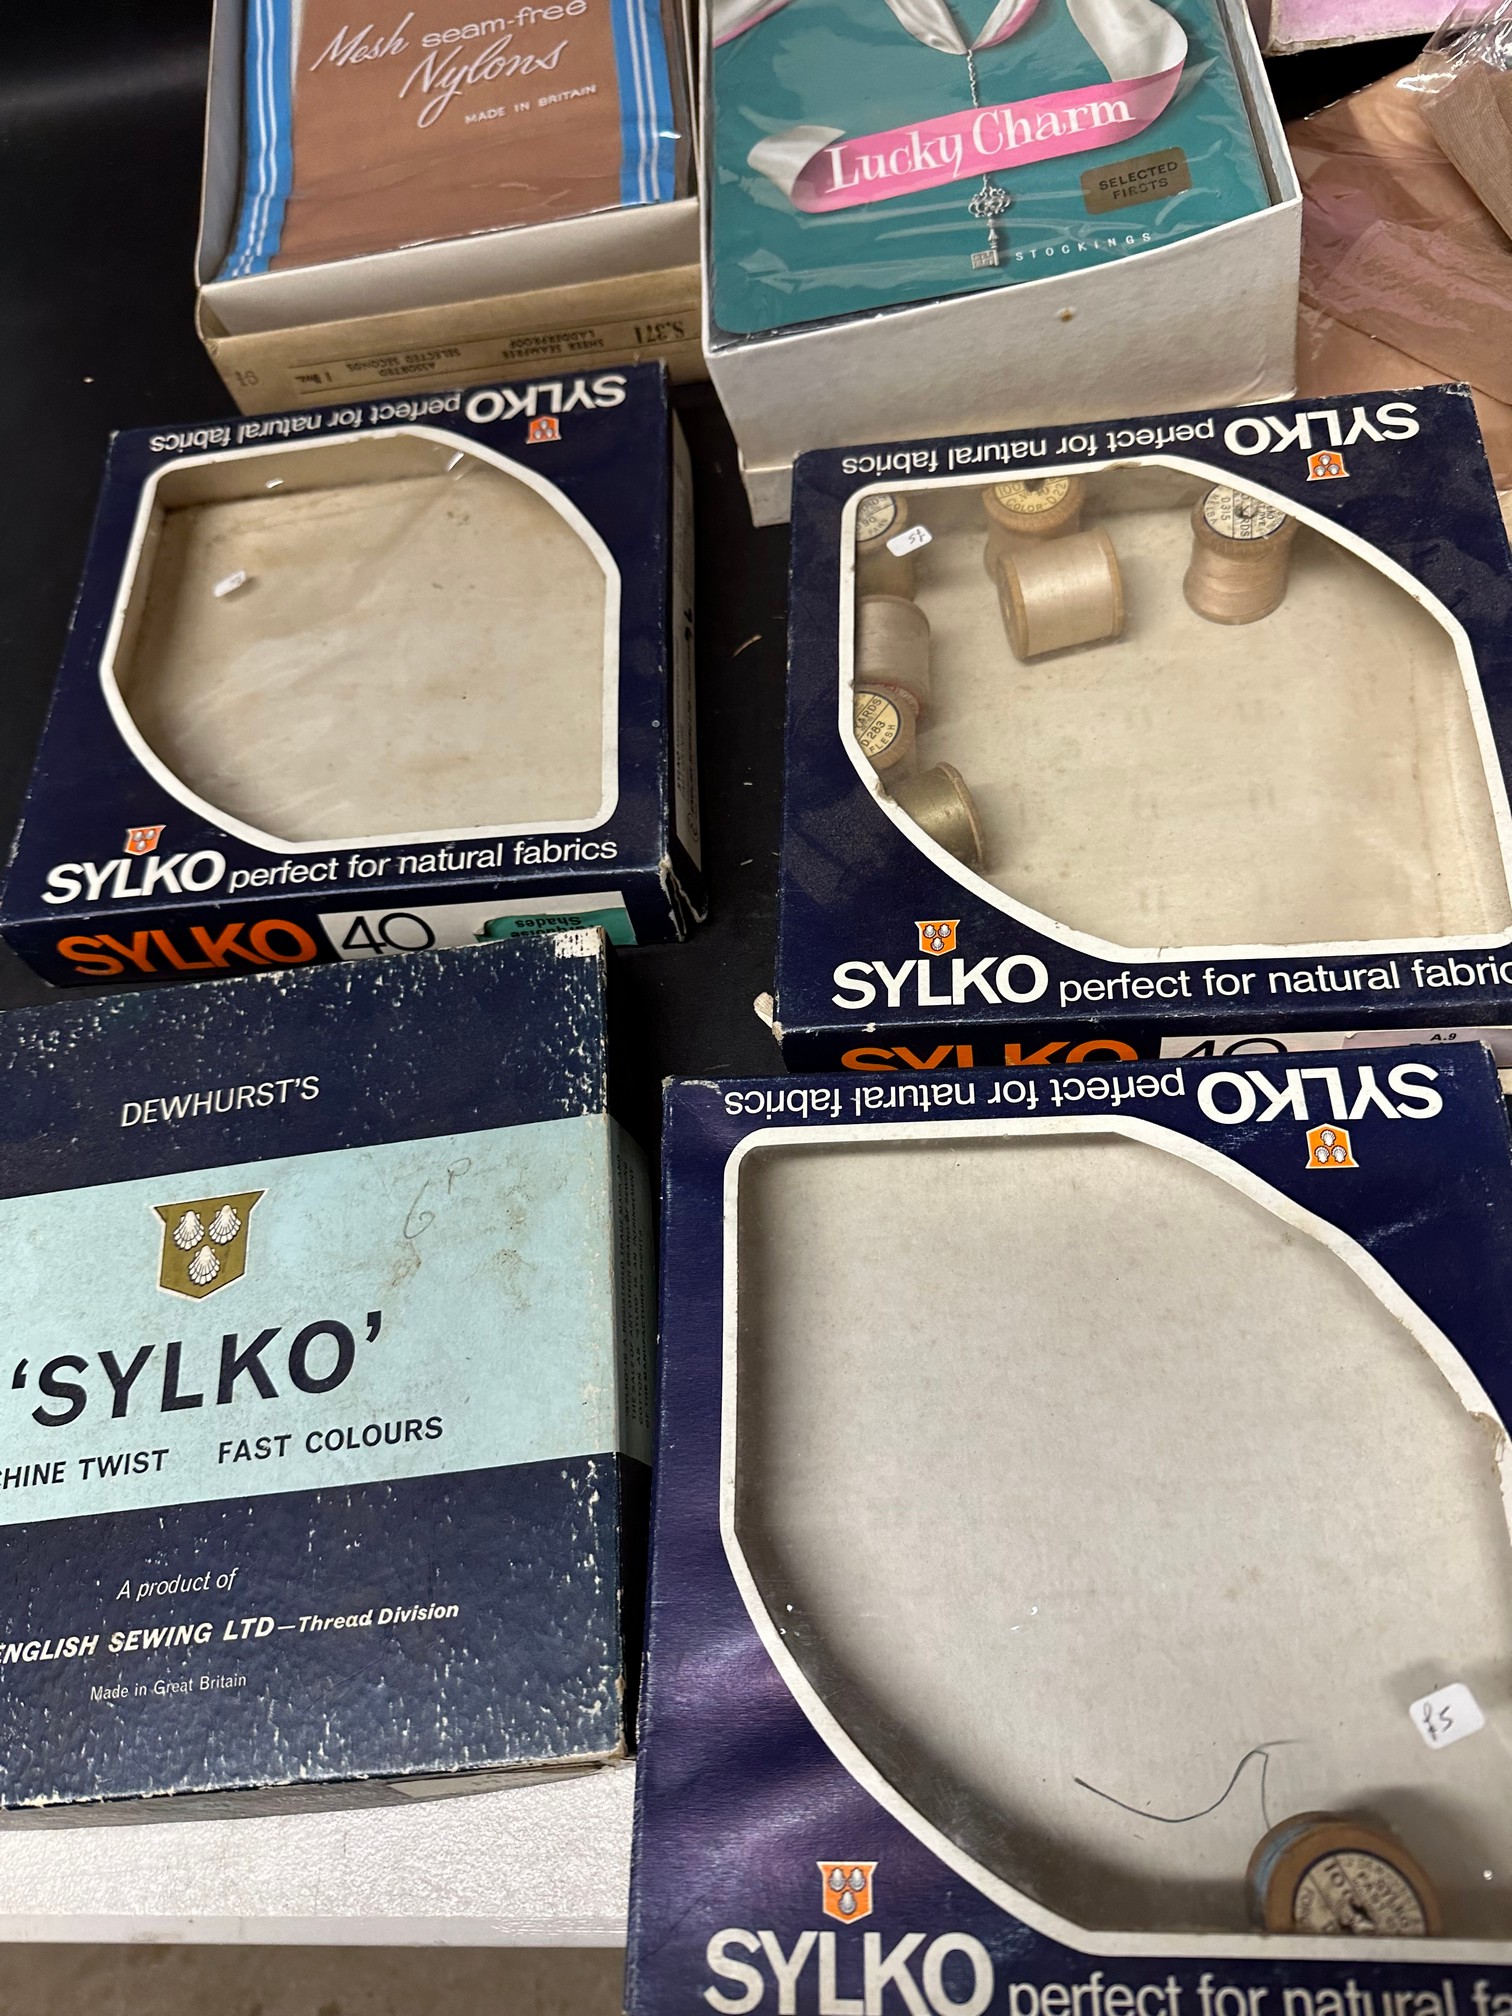 A selection of sewing patterns, nylons/stockings in original packaging, Sylko packaging etc. - Image 2 of 10